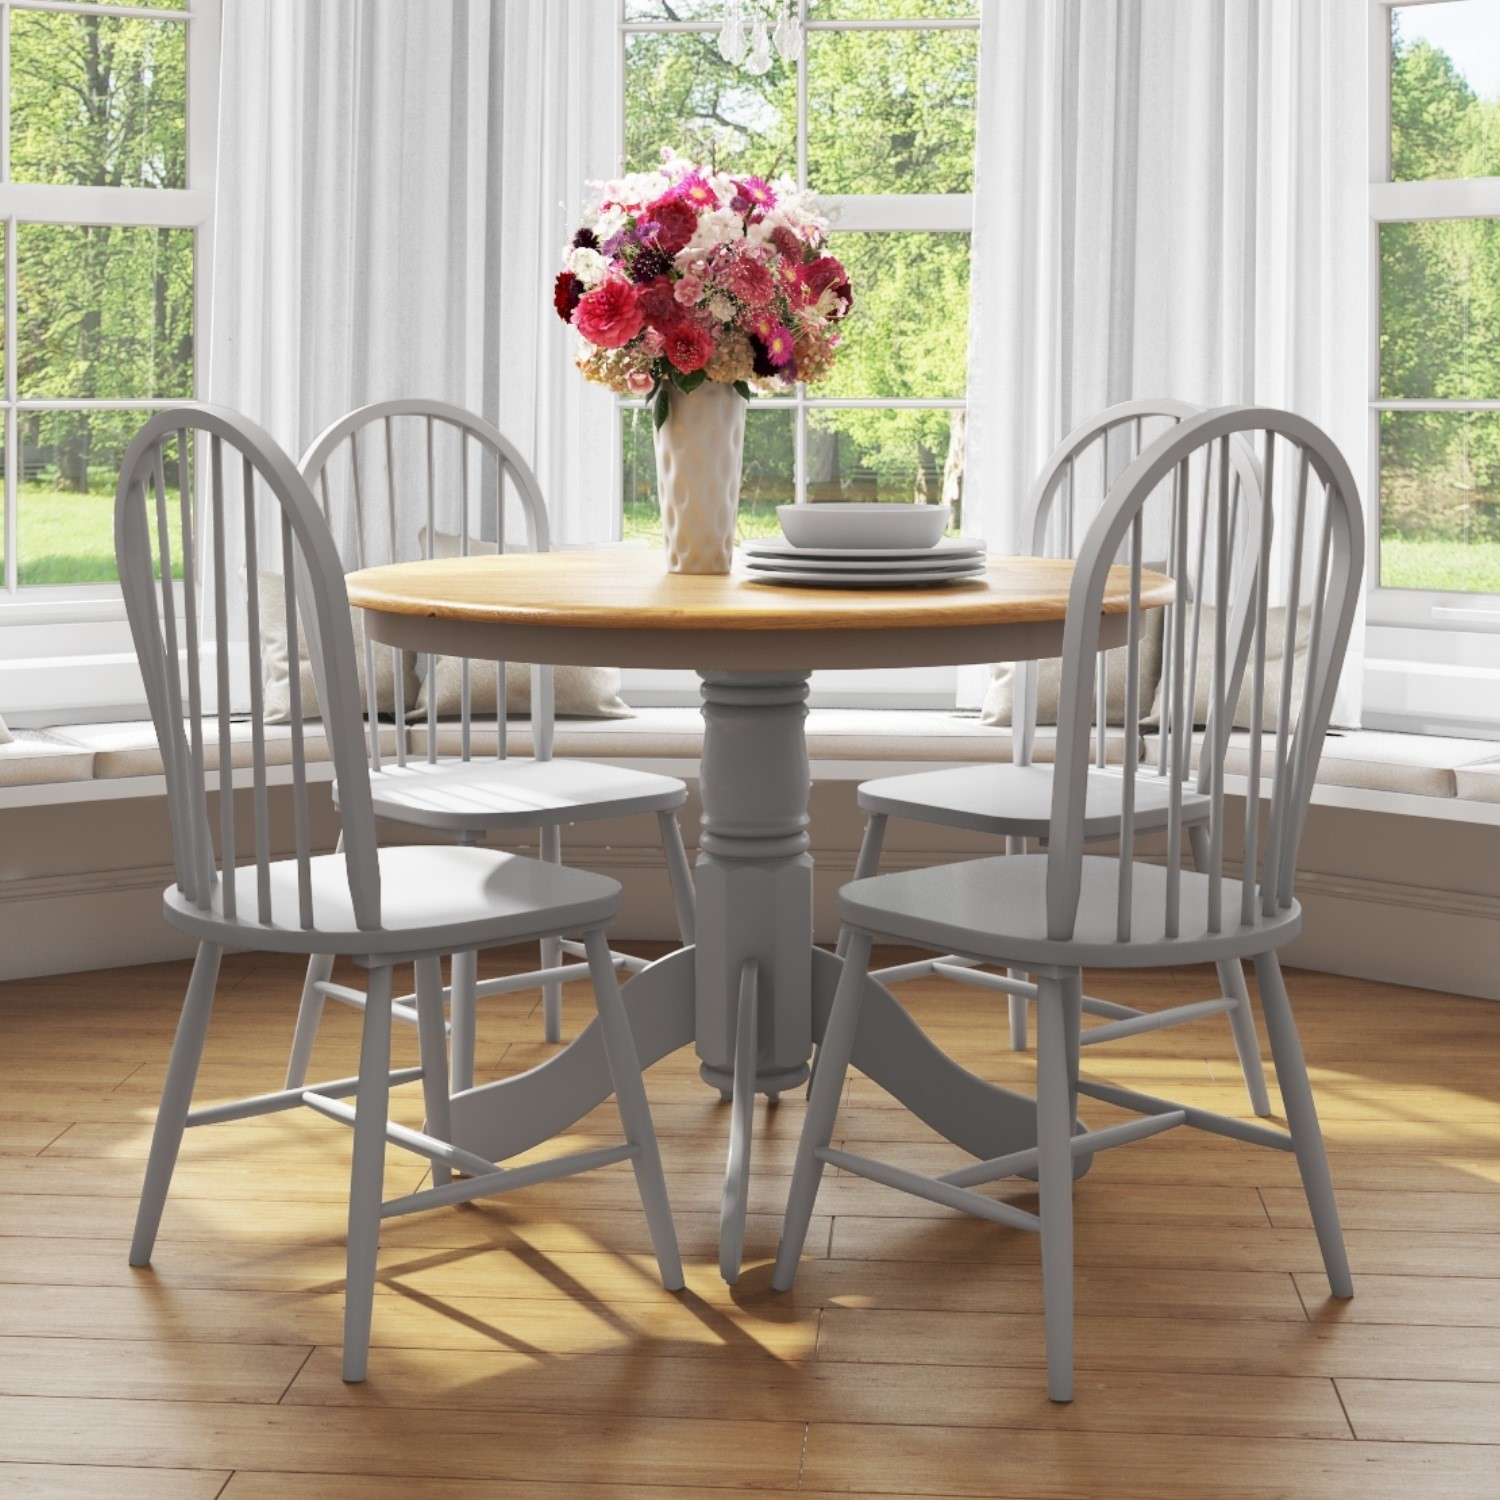 Round Dining Table 4 Chairs - Euston 1 2m Glass Round Dining Table 4